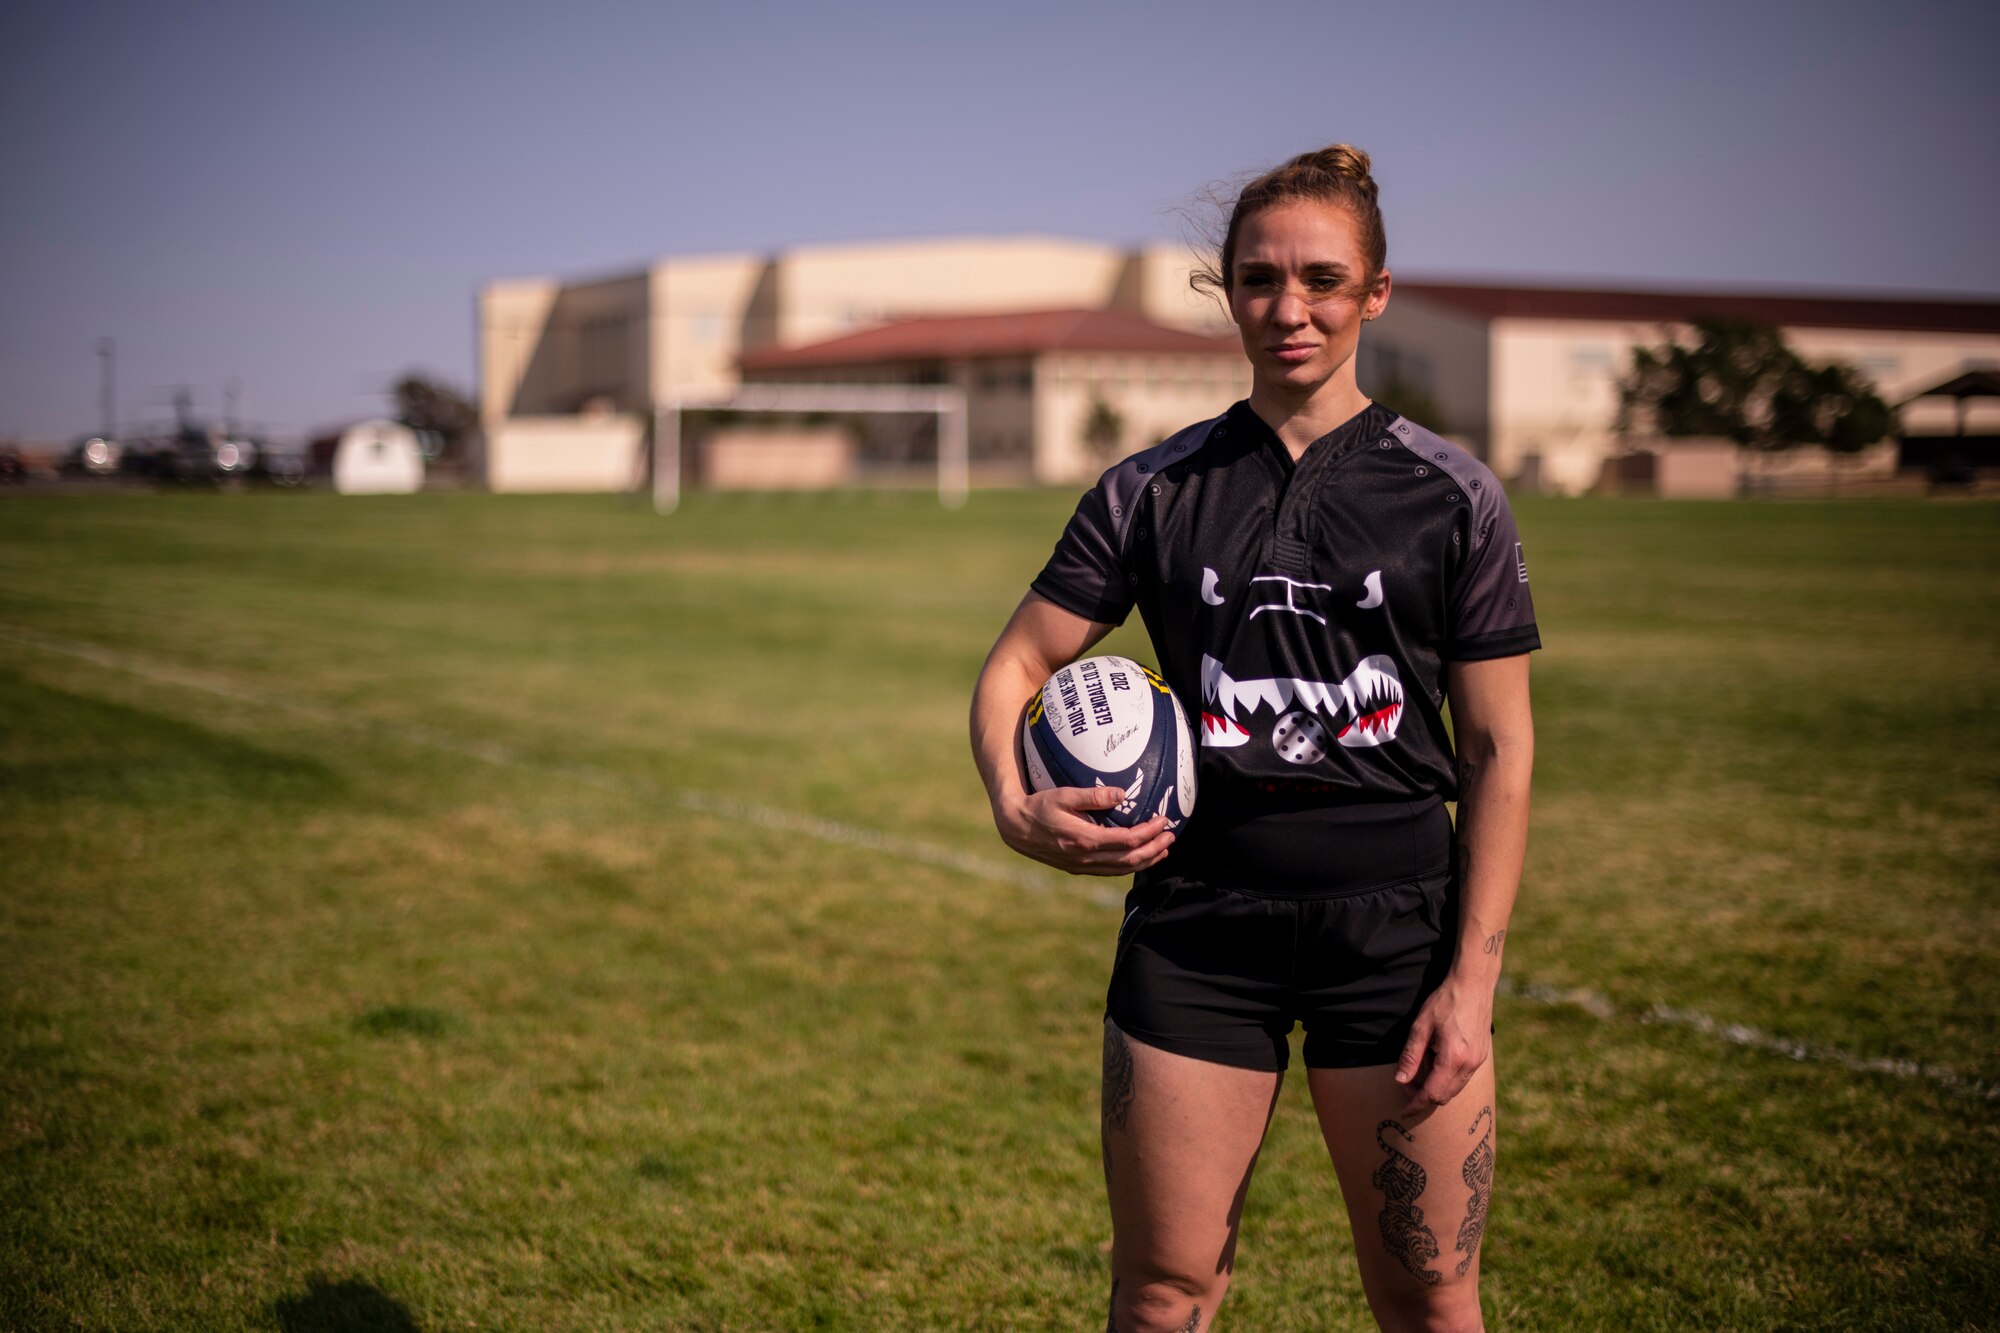 A woman stand on a soccer field holding a rugby ball.